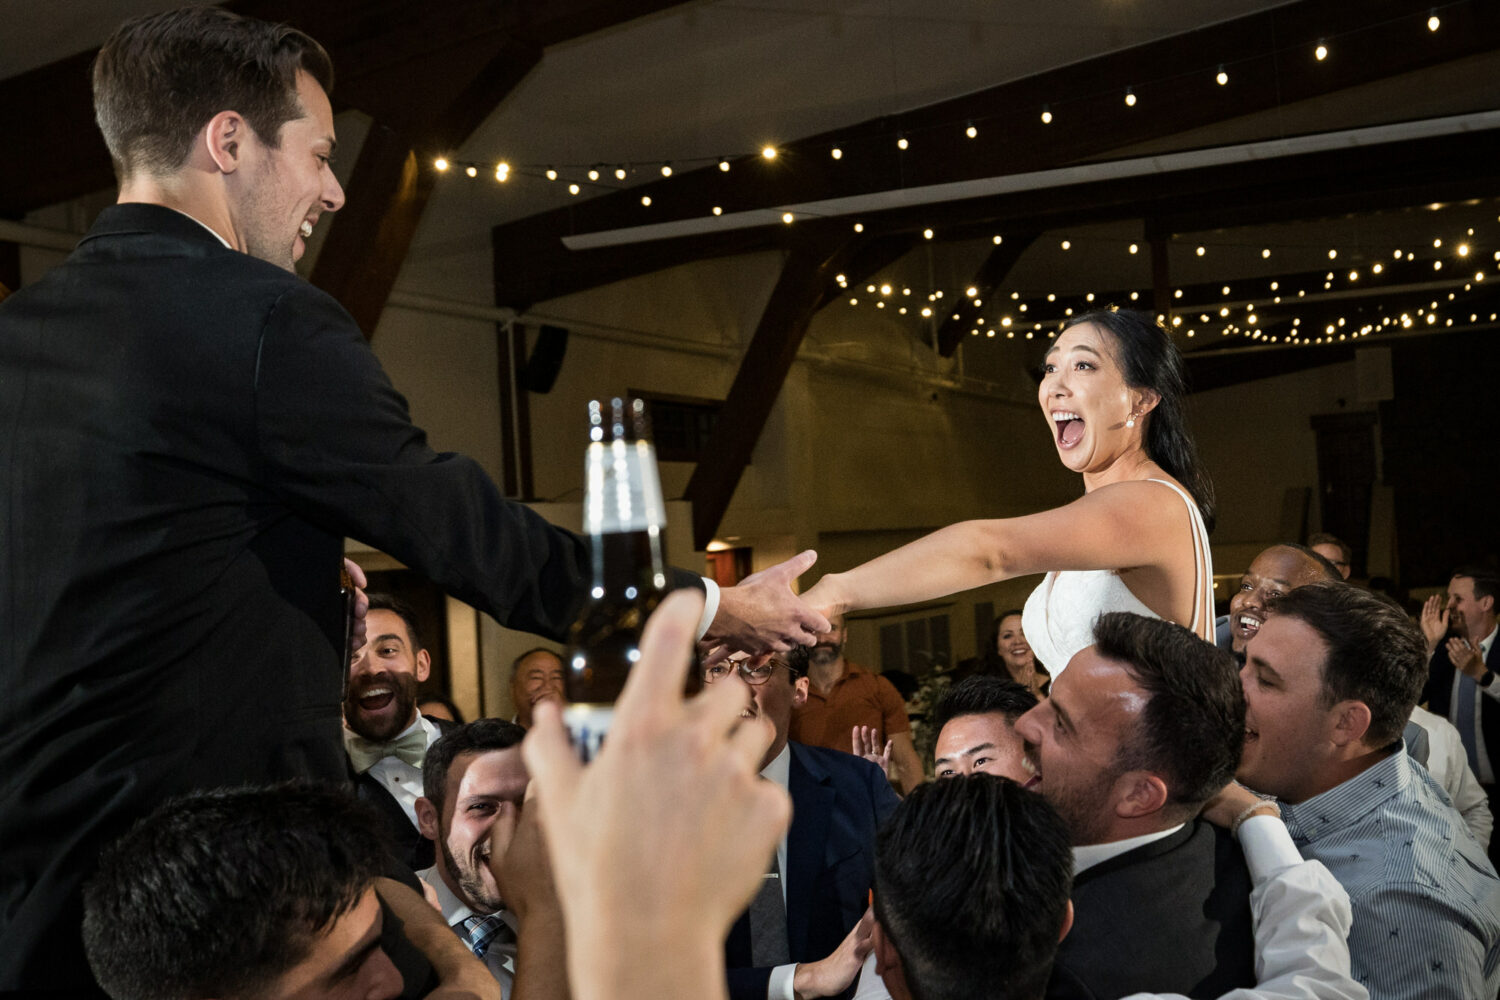 An exciting moment as wedding guests lift the bride and groom on their shoulders.